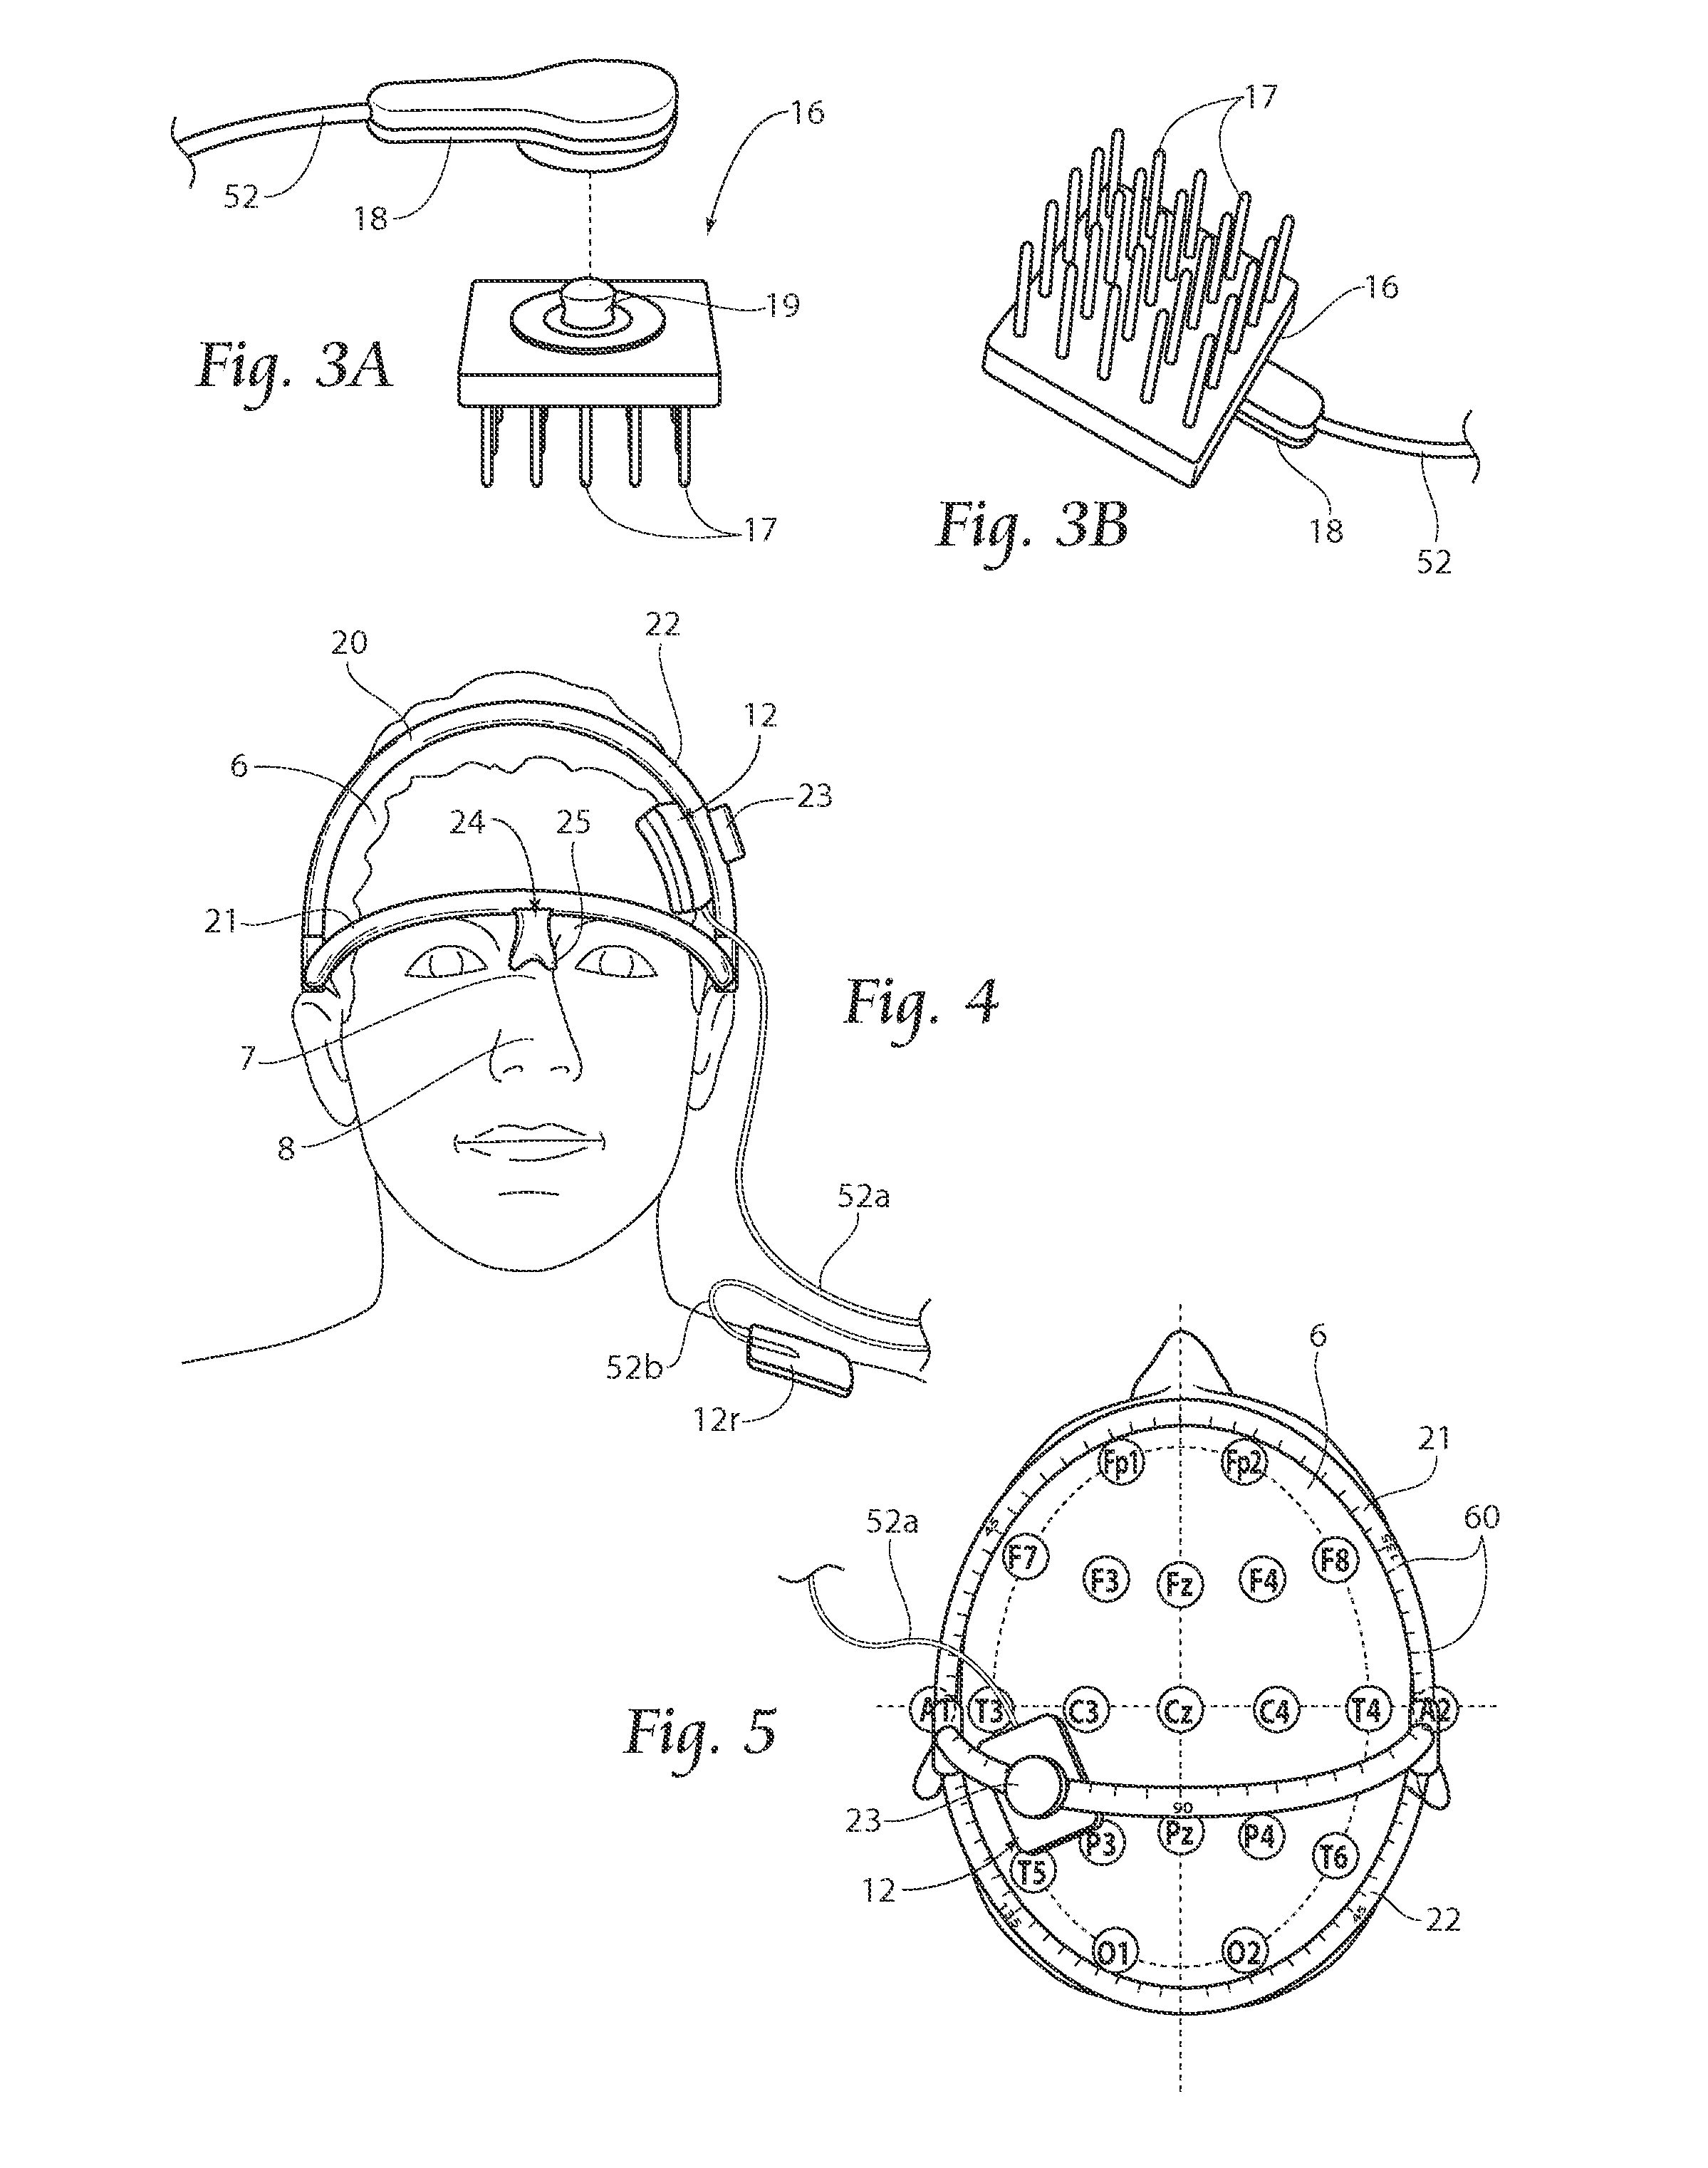 Systems for and methods of transcranial direct current electrical stimulation